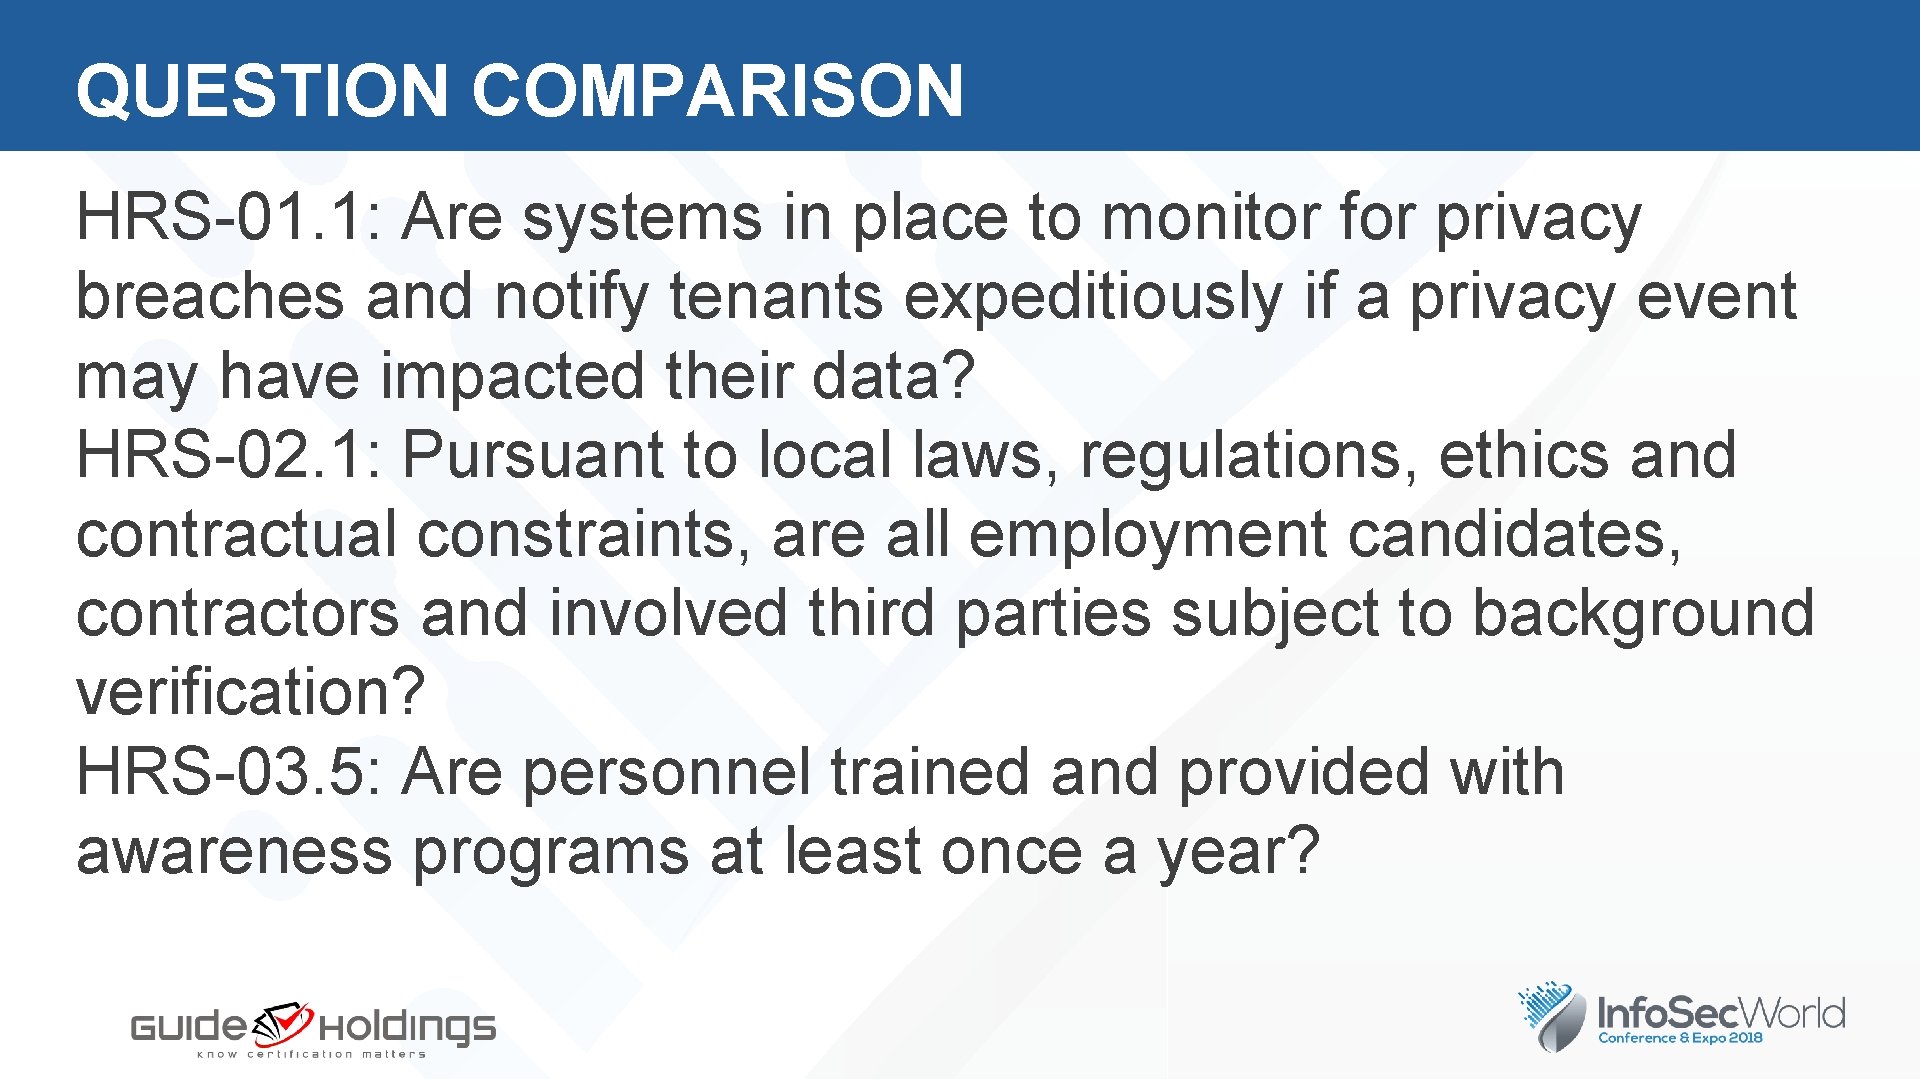 QUESTION COMPARISON HRS-01. 1: Are systems in place to monitor for privacy breaches and